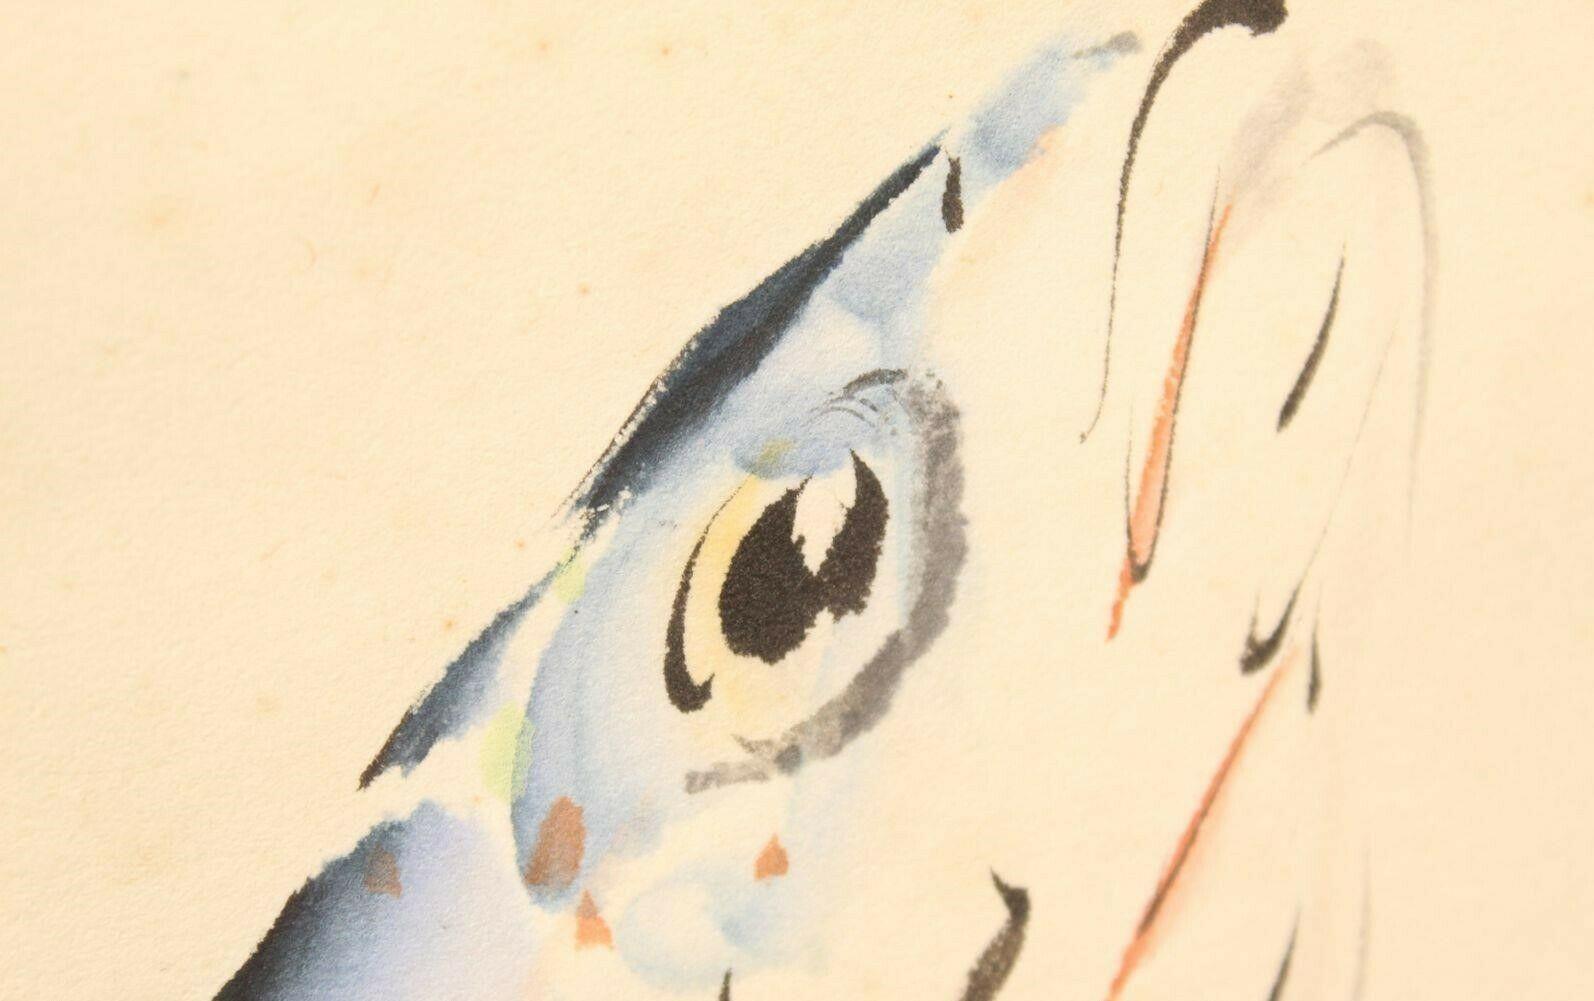 Chiura Obata (1885 - 1975)
Leaping Trout, 1930
Watercolor on paper
Sight 23 x 15 inches
Signed and stamped lower left

Provenance:
Private Collection, Massachusetts

Chiura Obata ranks among the most significant California-based artists and Japanese